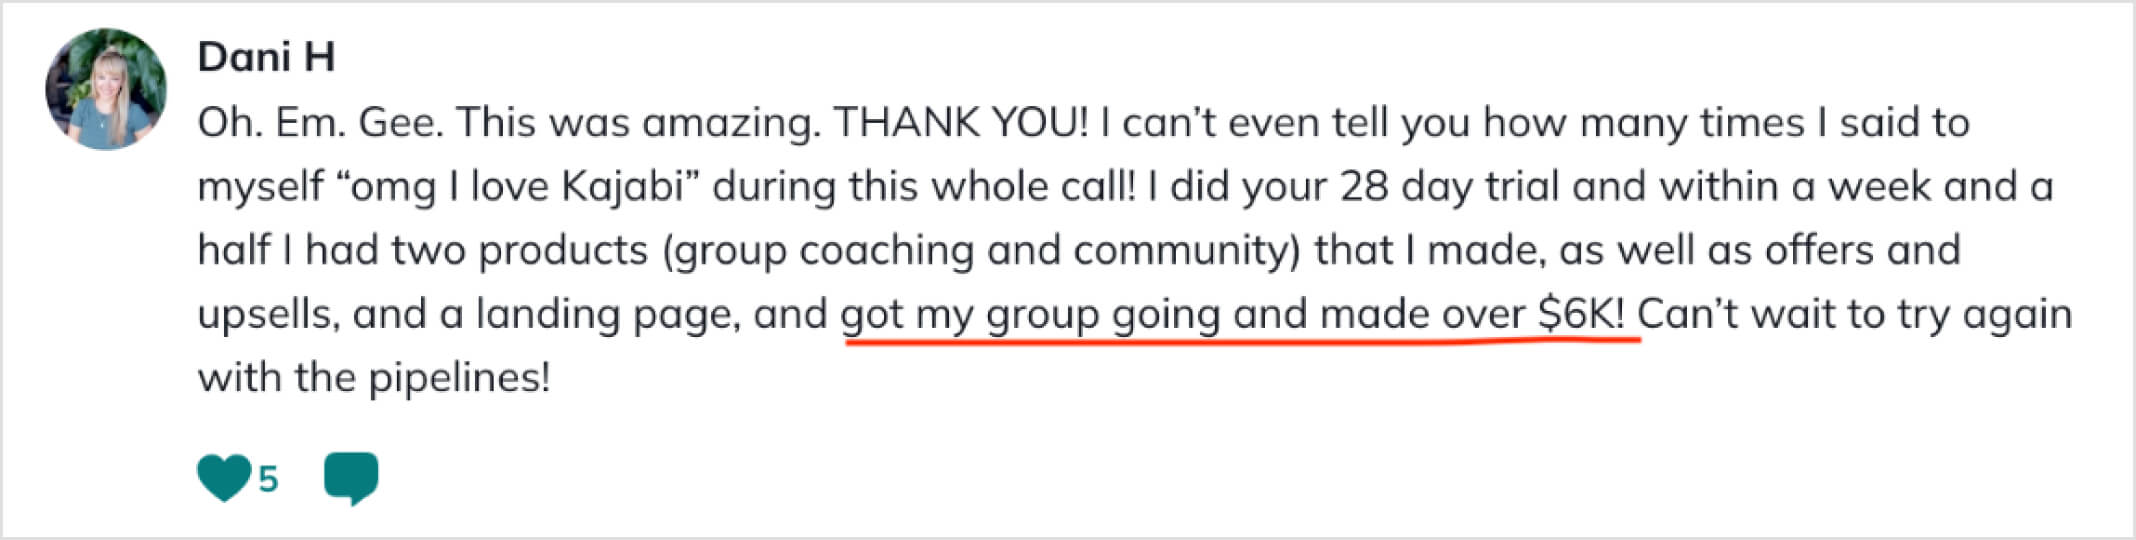 Screen capture of a positive customer testimonial expressed in a comment, highlighting the user's success with a product or service which resulted in earning over $8k.